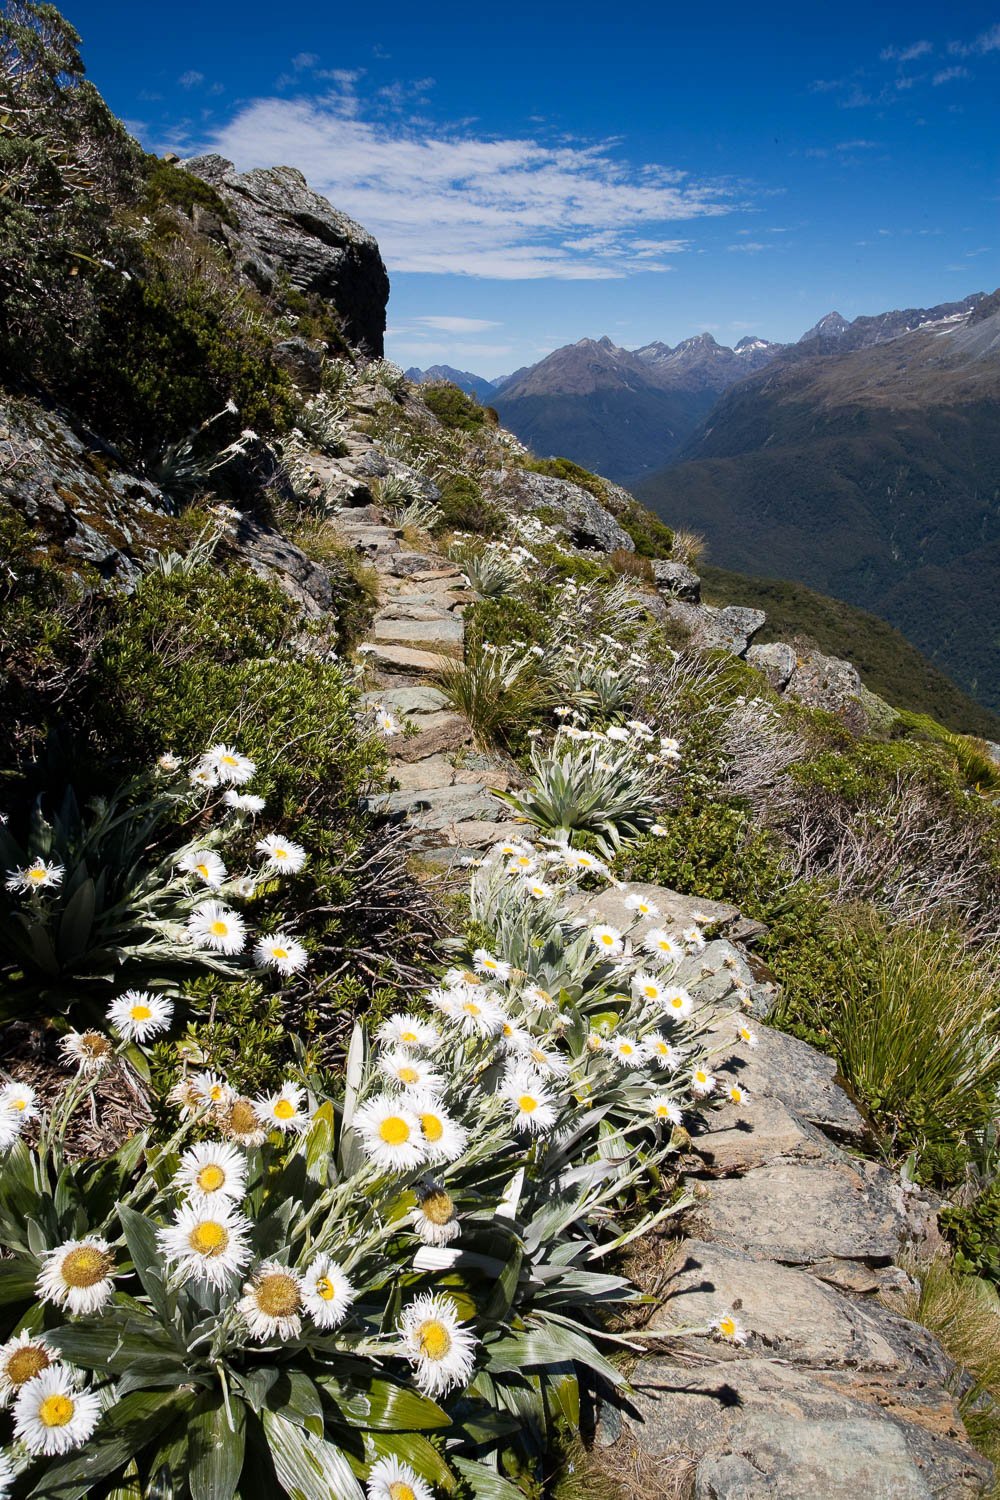 The pathway on a high mountain with some trees and plants around, Mountain Daisy #2, Routeburn Track - New Zealand